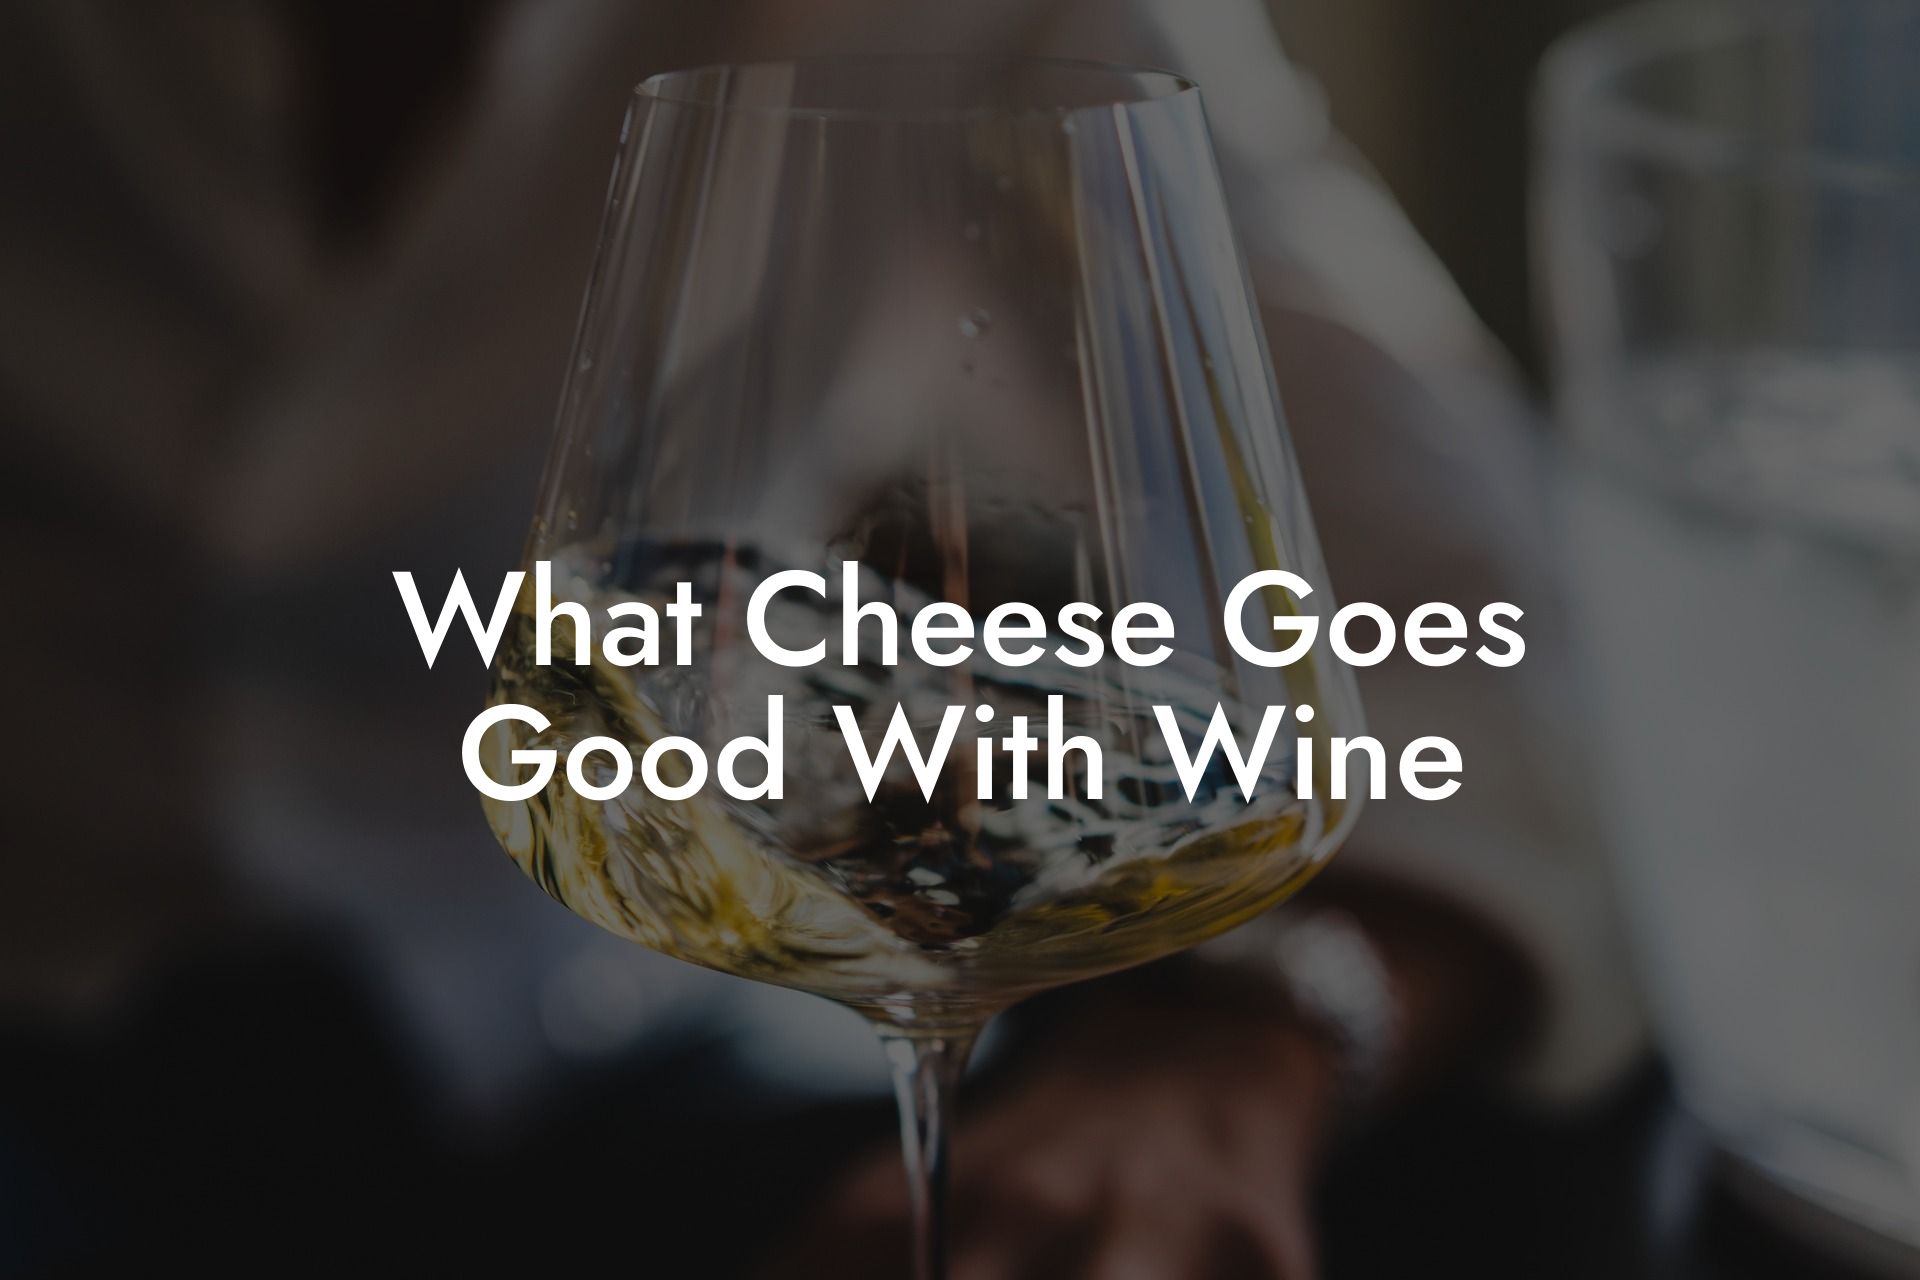 What Cheese Goes Good With Wine